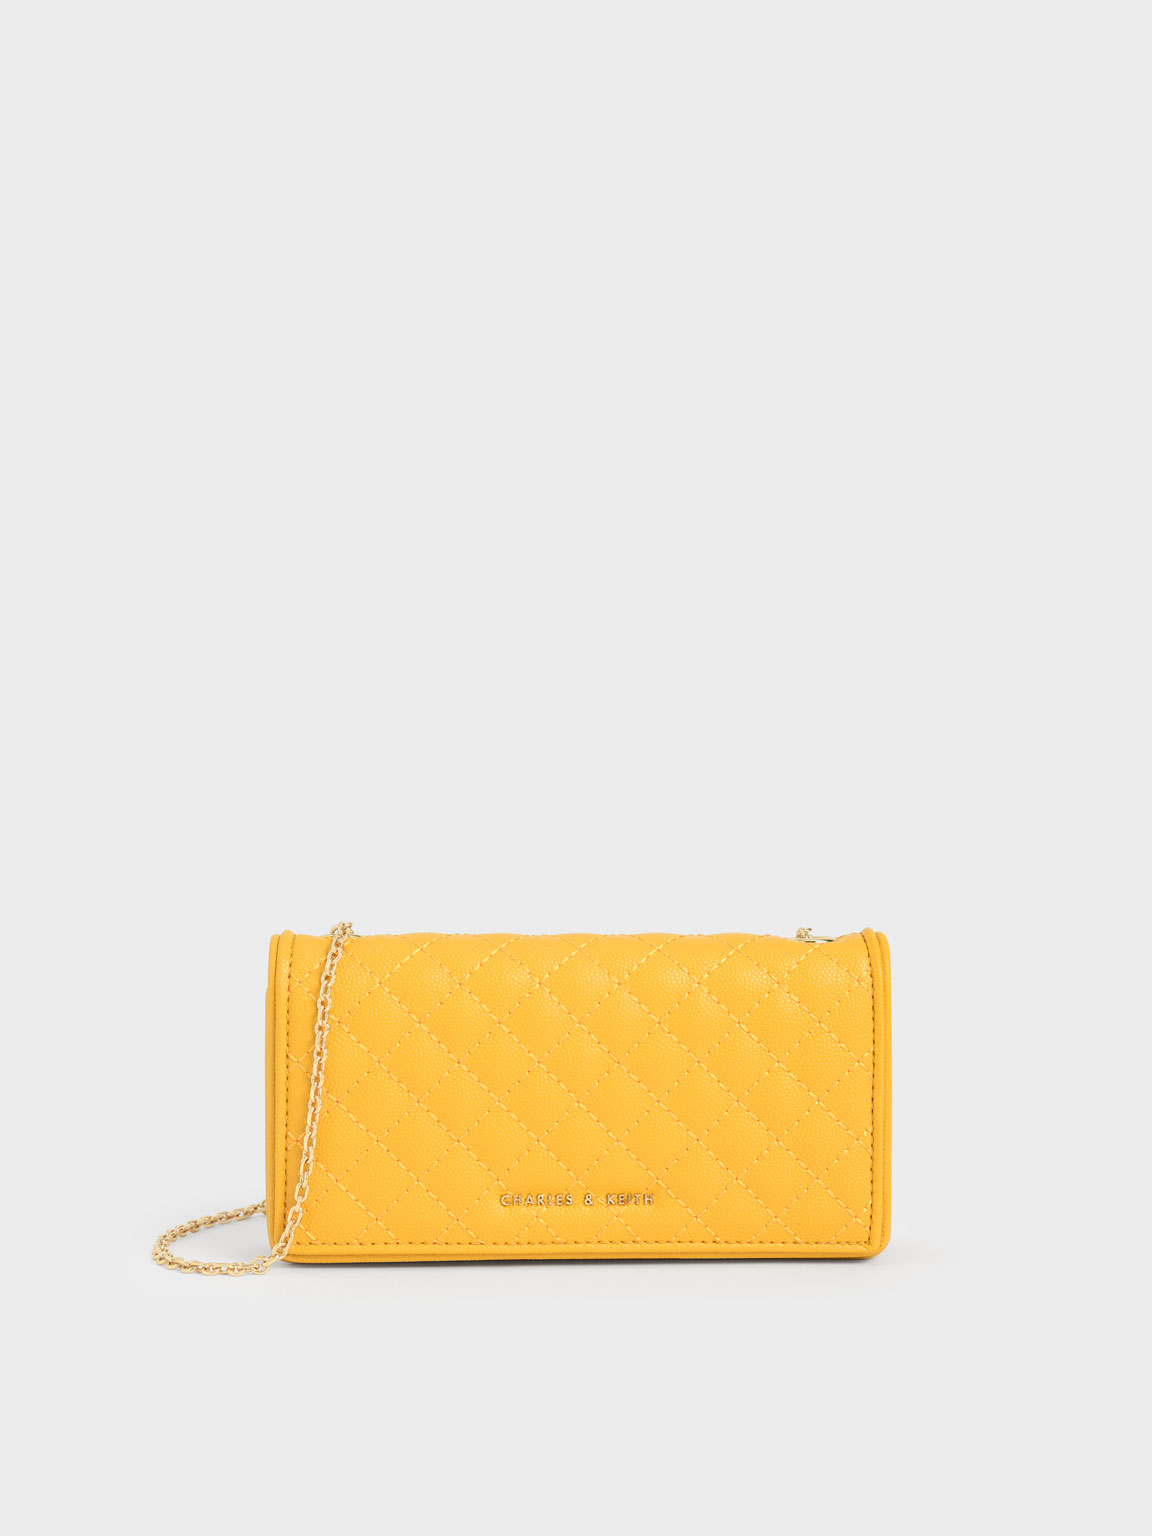 Black Quilted Pouch - CHARLES & KEITH International